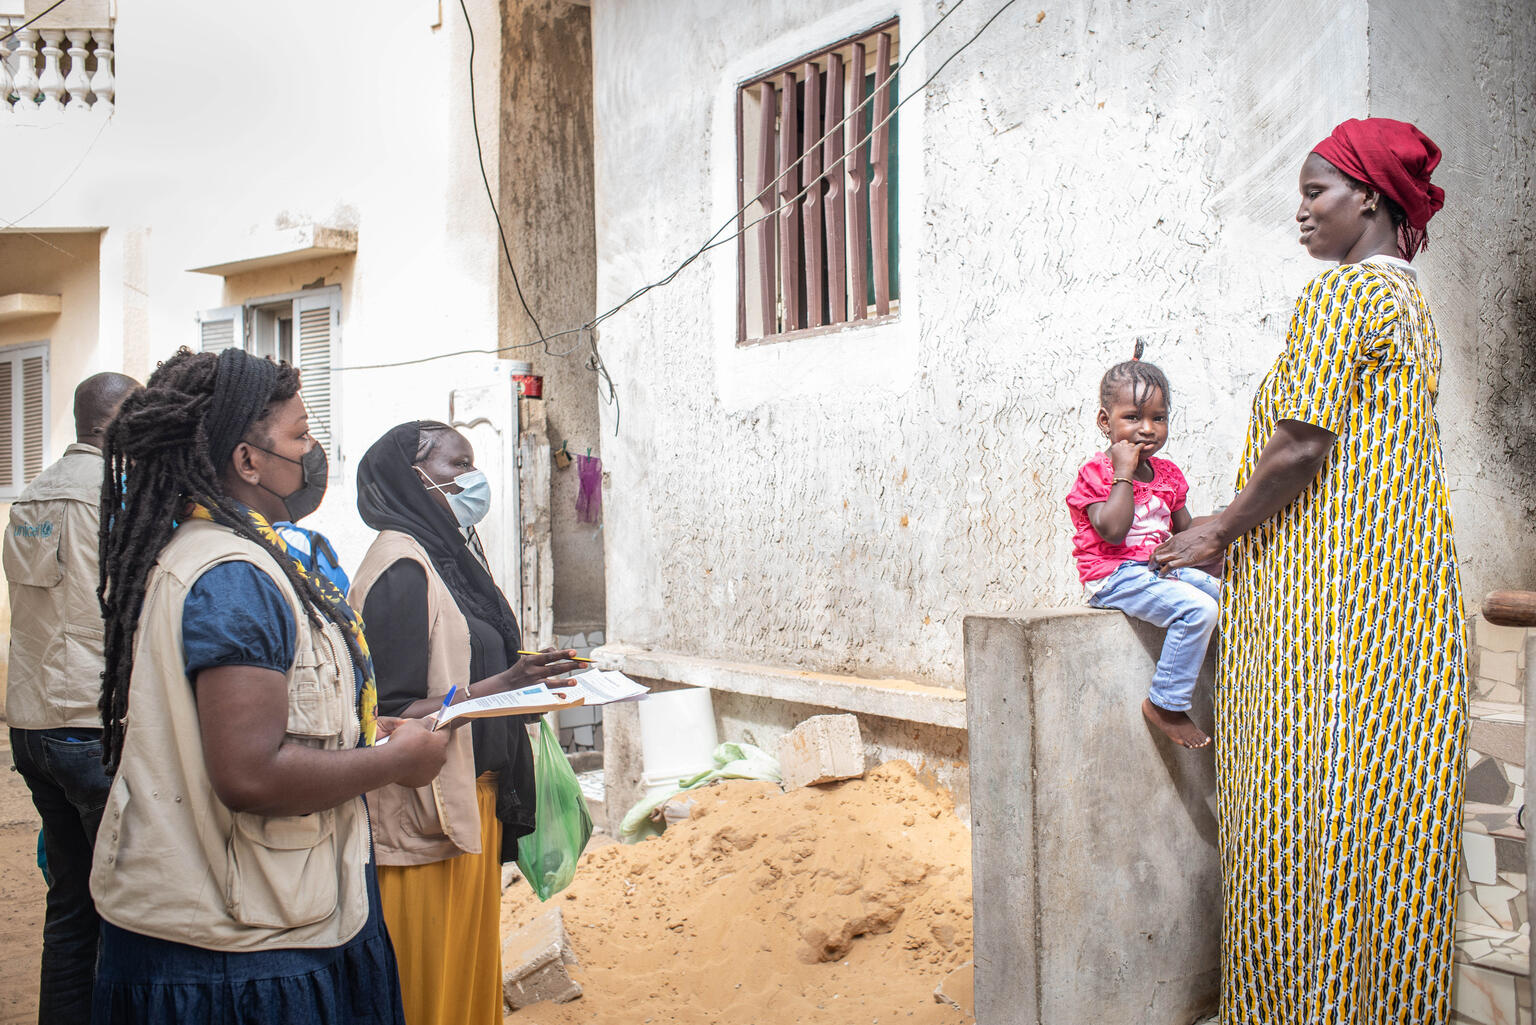 Social health workers Marie Astou Ndiaye and Nfeye Sarata Ndiaye, and UNICEF staff members, on door-to-door household visits to speak with parents and caregivers about polio, and vaccinate their children during a polio vaccination campaign on 18 December 2021.